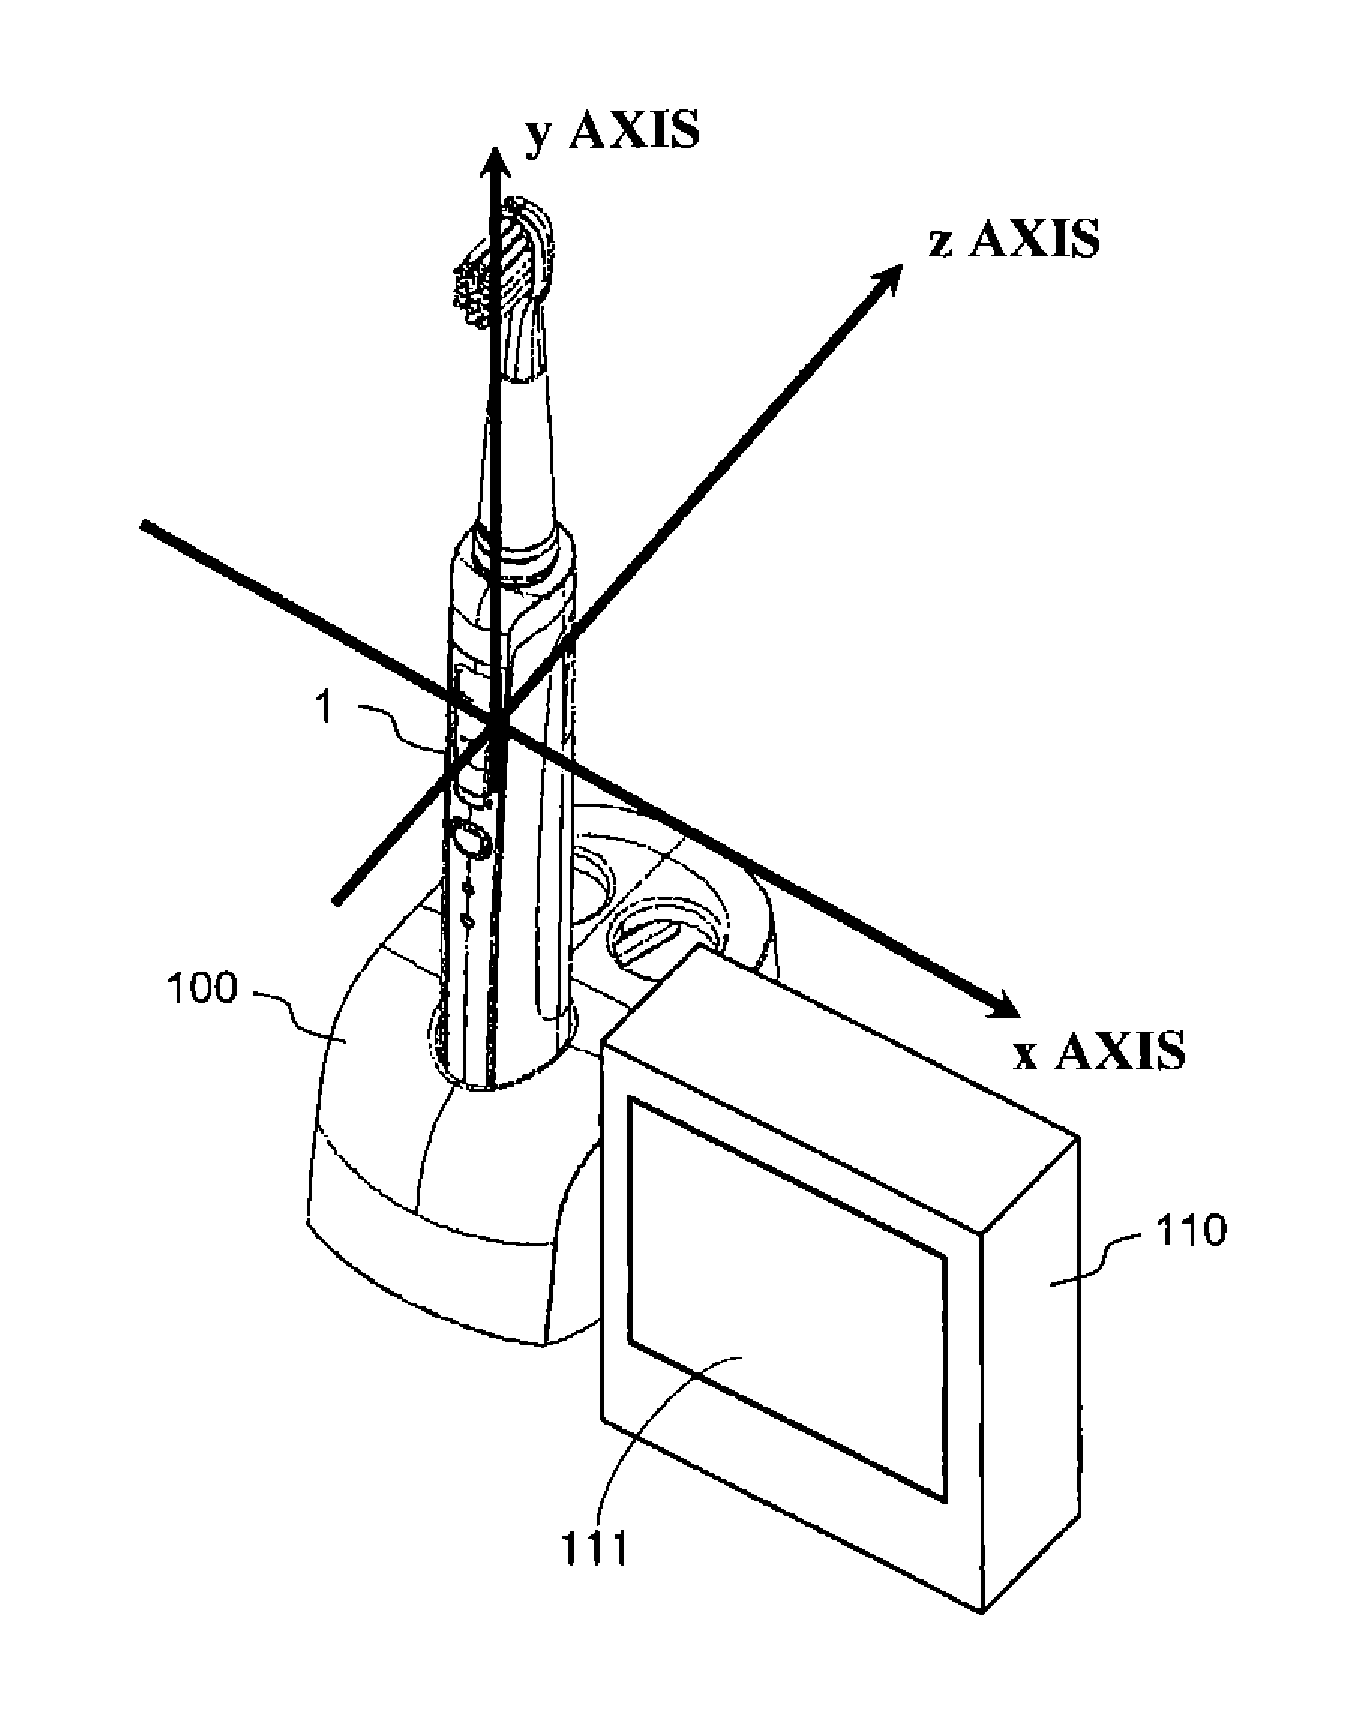 Oral care apparatus applied to the removal of dental plaque